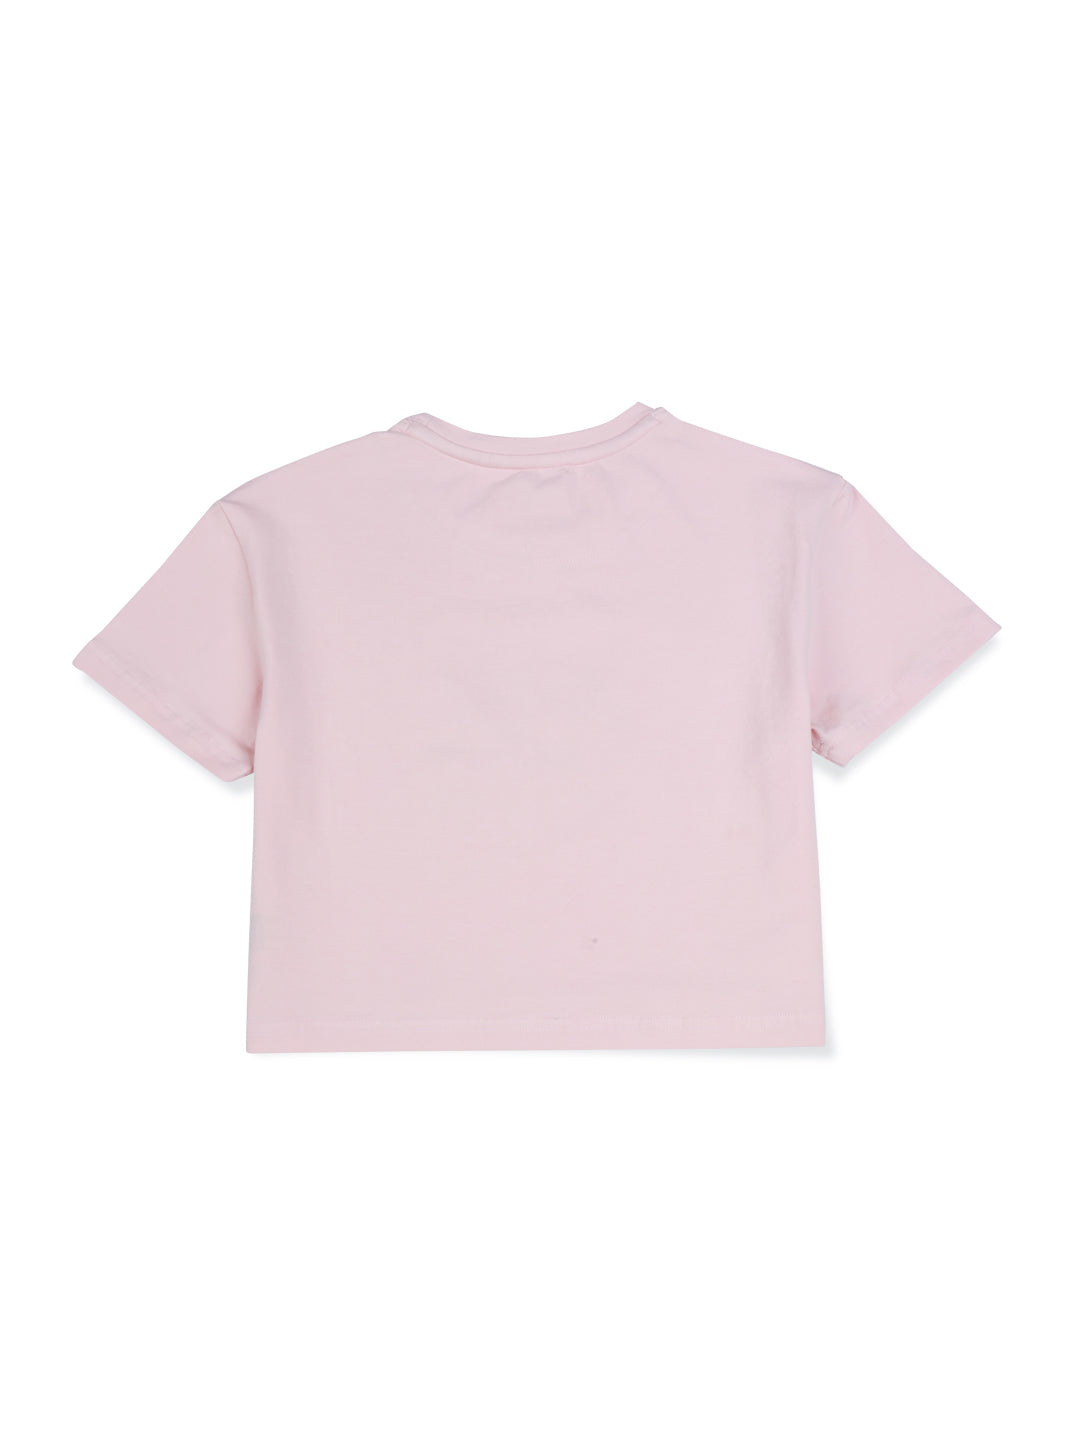 Girls Peach Cotton Solid Knits Top